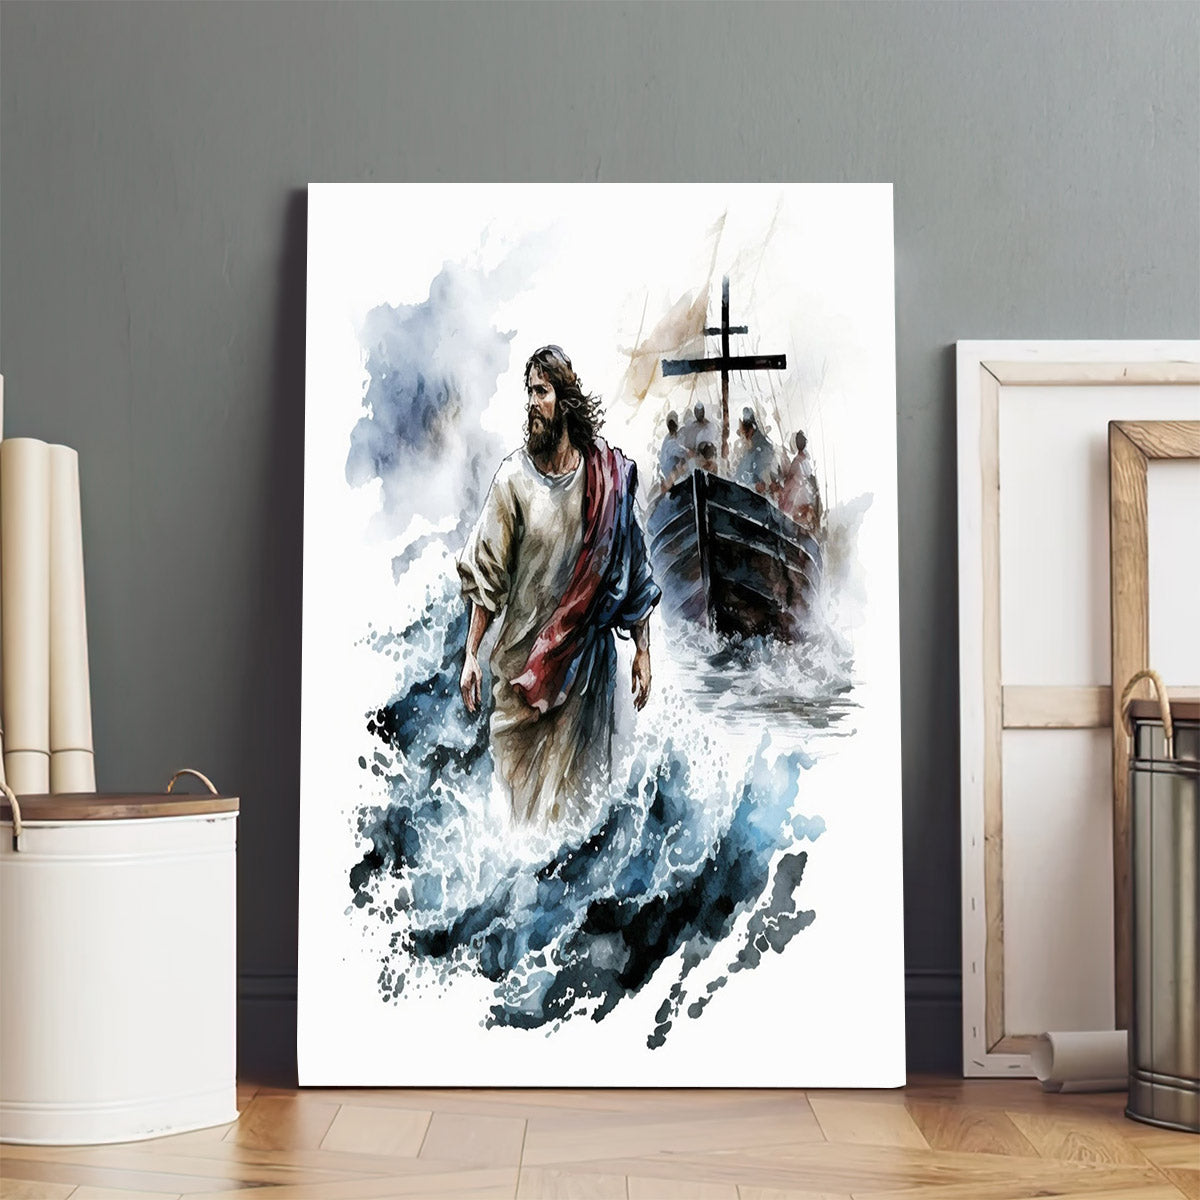 Jesus Walking On Water In Watercolor - Canvas Pictures - Jesus Canvas Art - Christian Wall Art